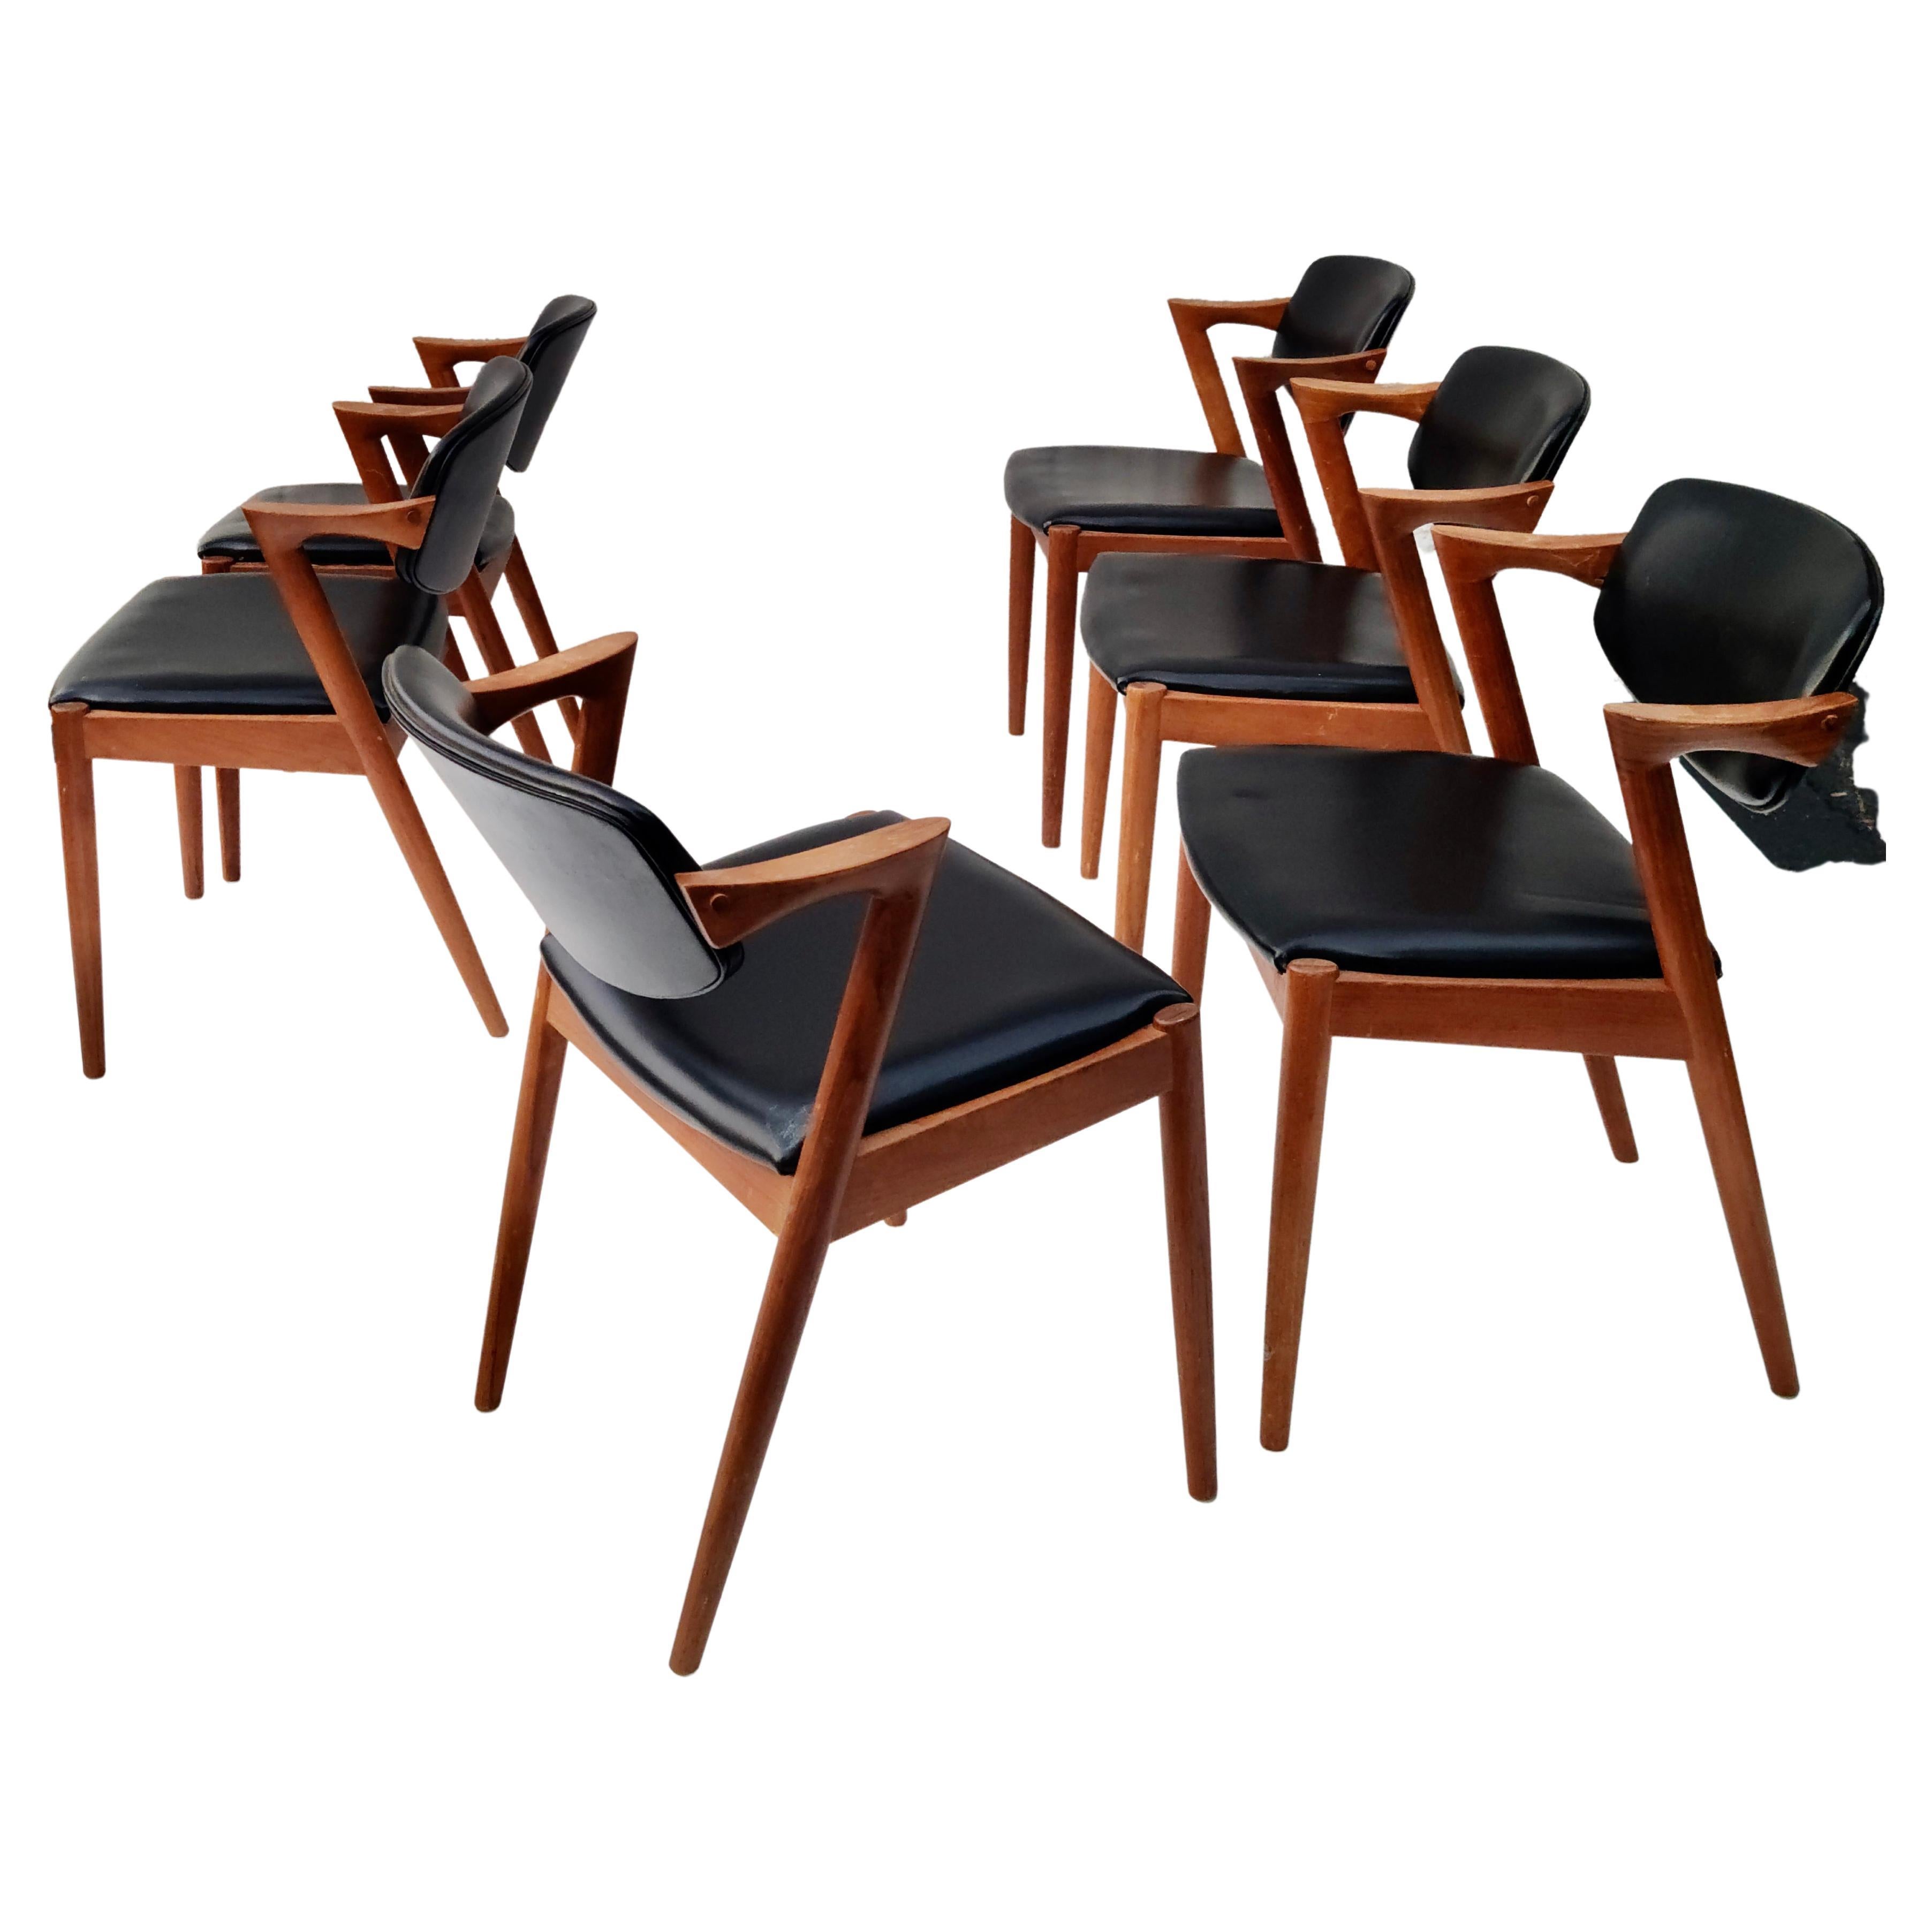 Please feel free to reach out for accurate shipping to your location.

Set of six Dining chairs by Kai Kristiansen.
Sculpted Teak construction.
Made in Denmark.